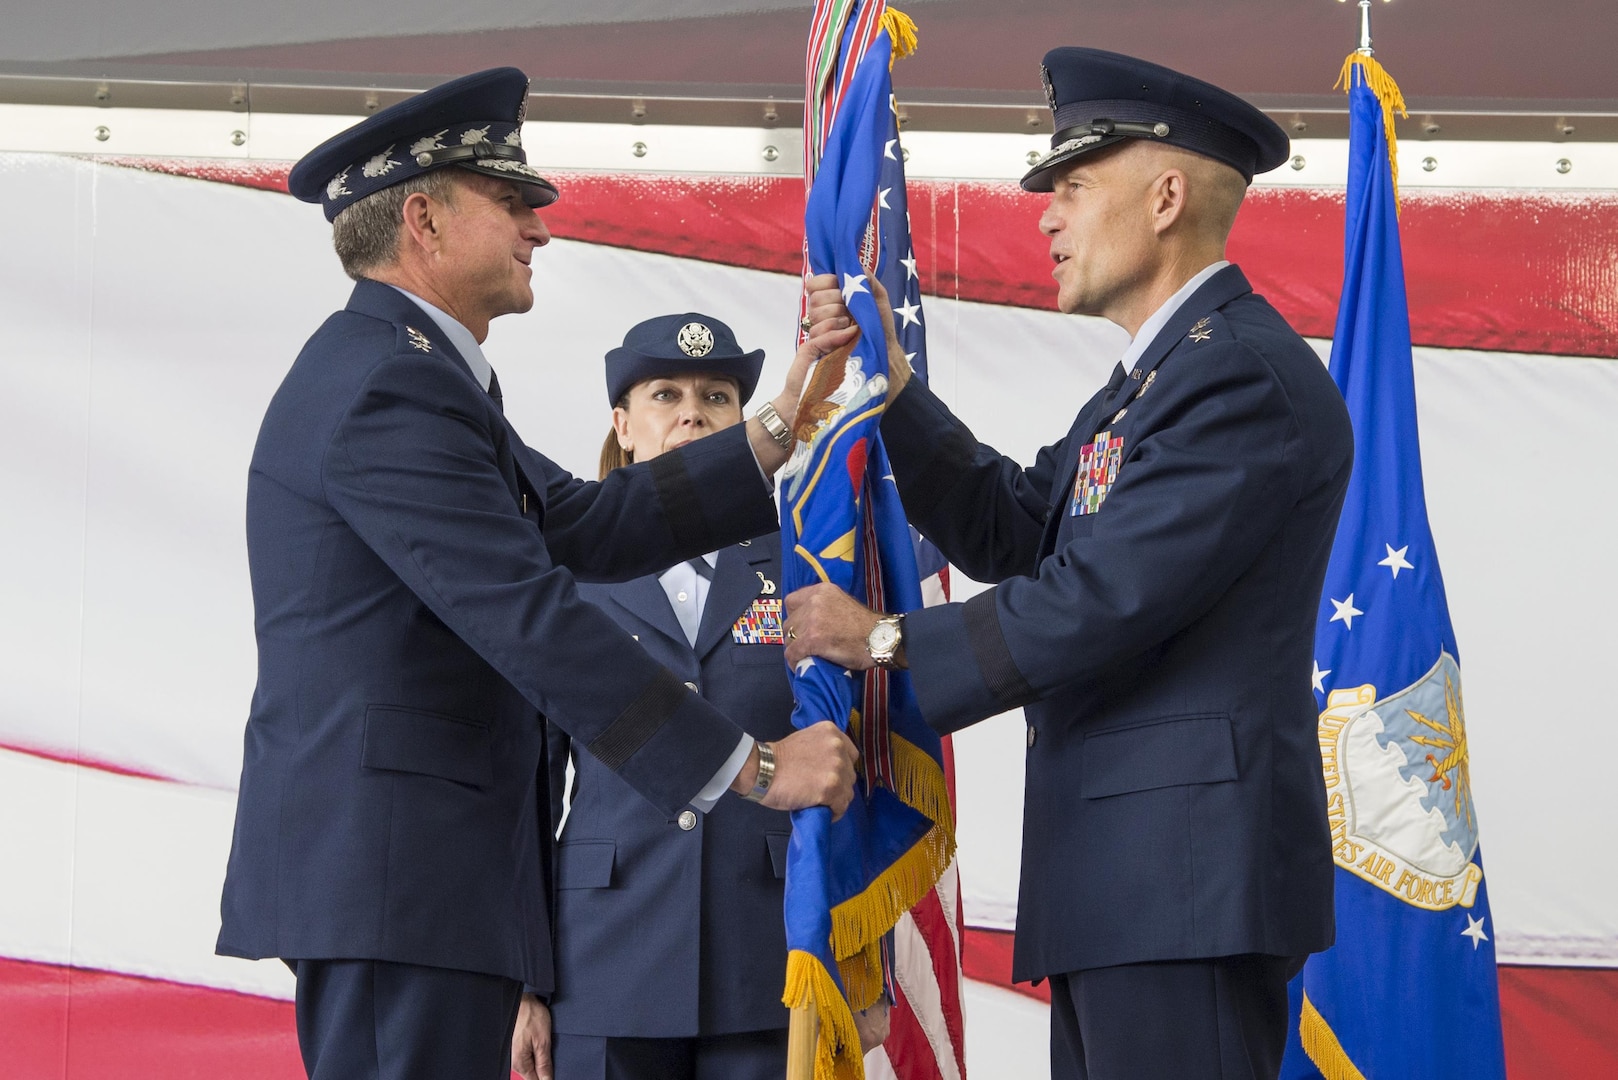 U.S. Air Force Chief of Staff Gen. David L. Goldfein, hands the guidon to Lt. Gen. Steven Kwast officially signifying his assumption of command of Air Education and Training Command Nov. 16, 2017, at Joint Base San Antonio-Randolph, Texas. Kwast, a U.S. Air Force Academy graduate, assumed command after spending the previous three years as president and commander of Air University, Maxwell Air Force Base, Alabama (U.S. Air Force photo by Sean Worrell)